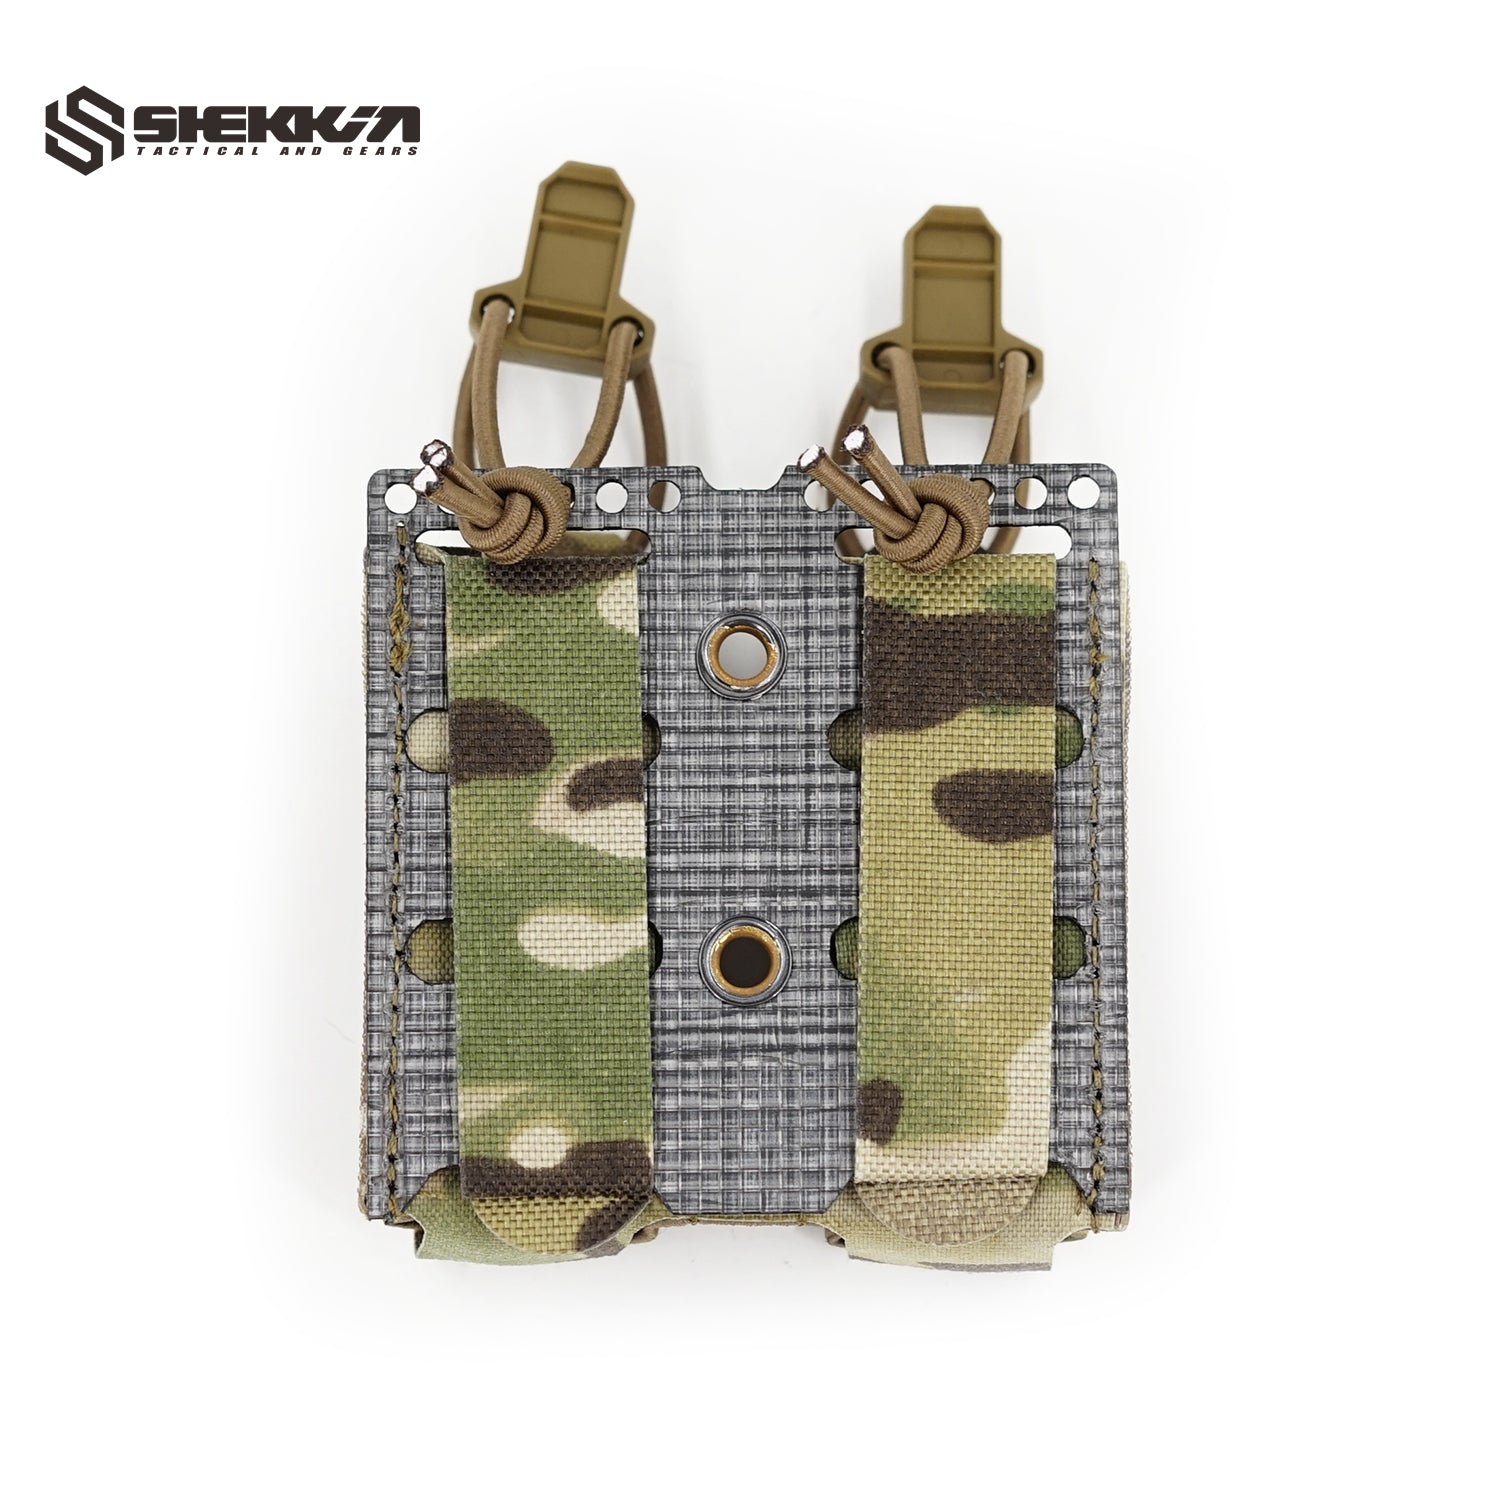 Double 9mm mag pouch with Tegris plate - Shekkin Gears